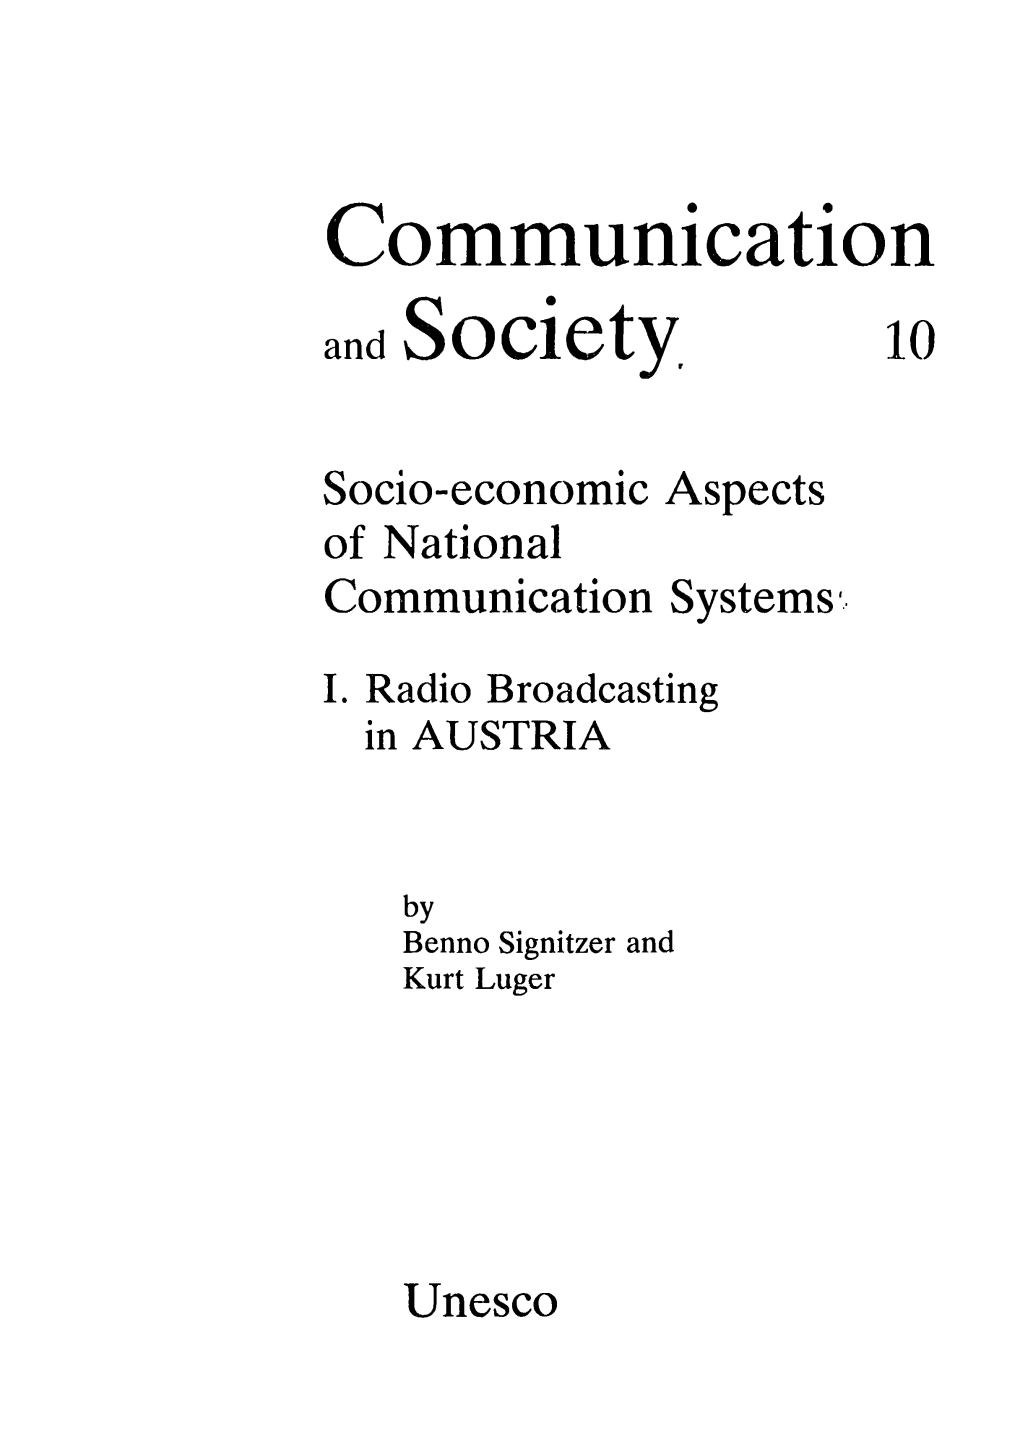 Socio-Economic Aspects of National Communication Systems, 1